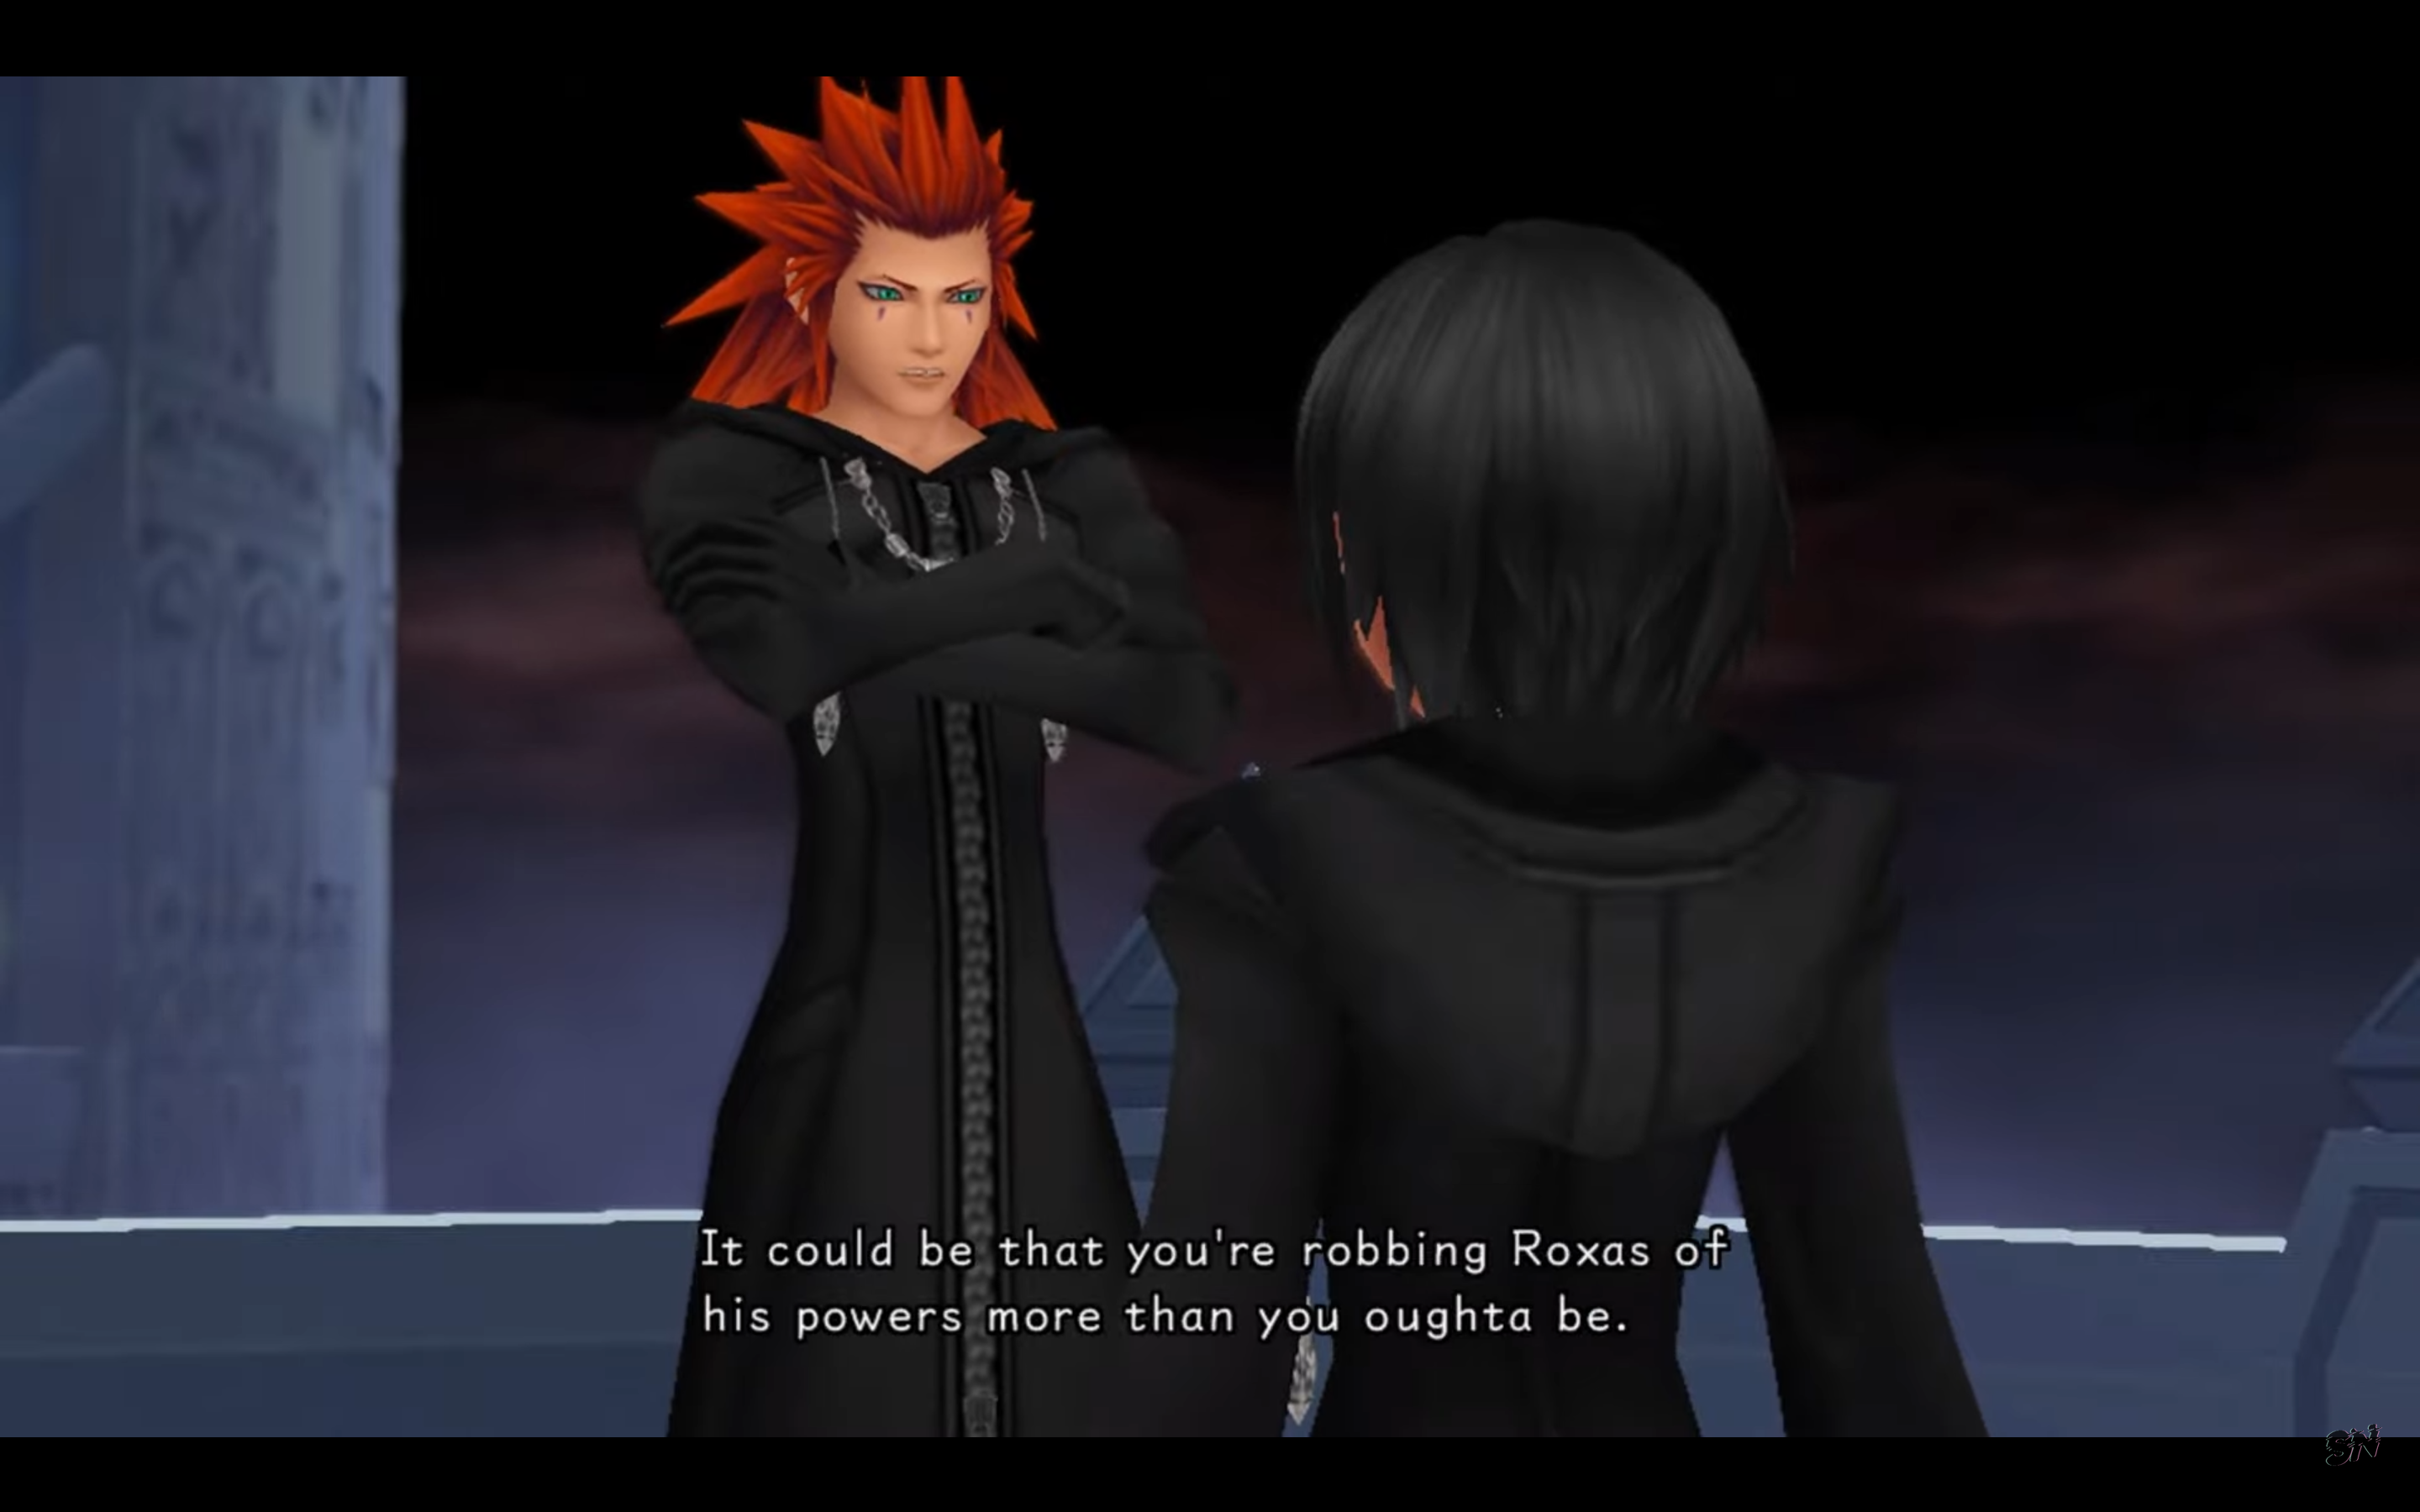 "Kingdom Hearts: 358/2 Days". 2009. Square Enix.
Xion and Axel discussing Roxas's powers.